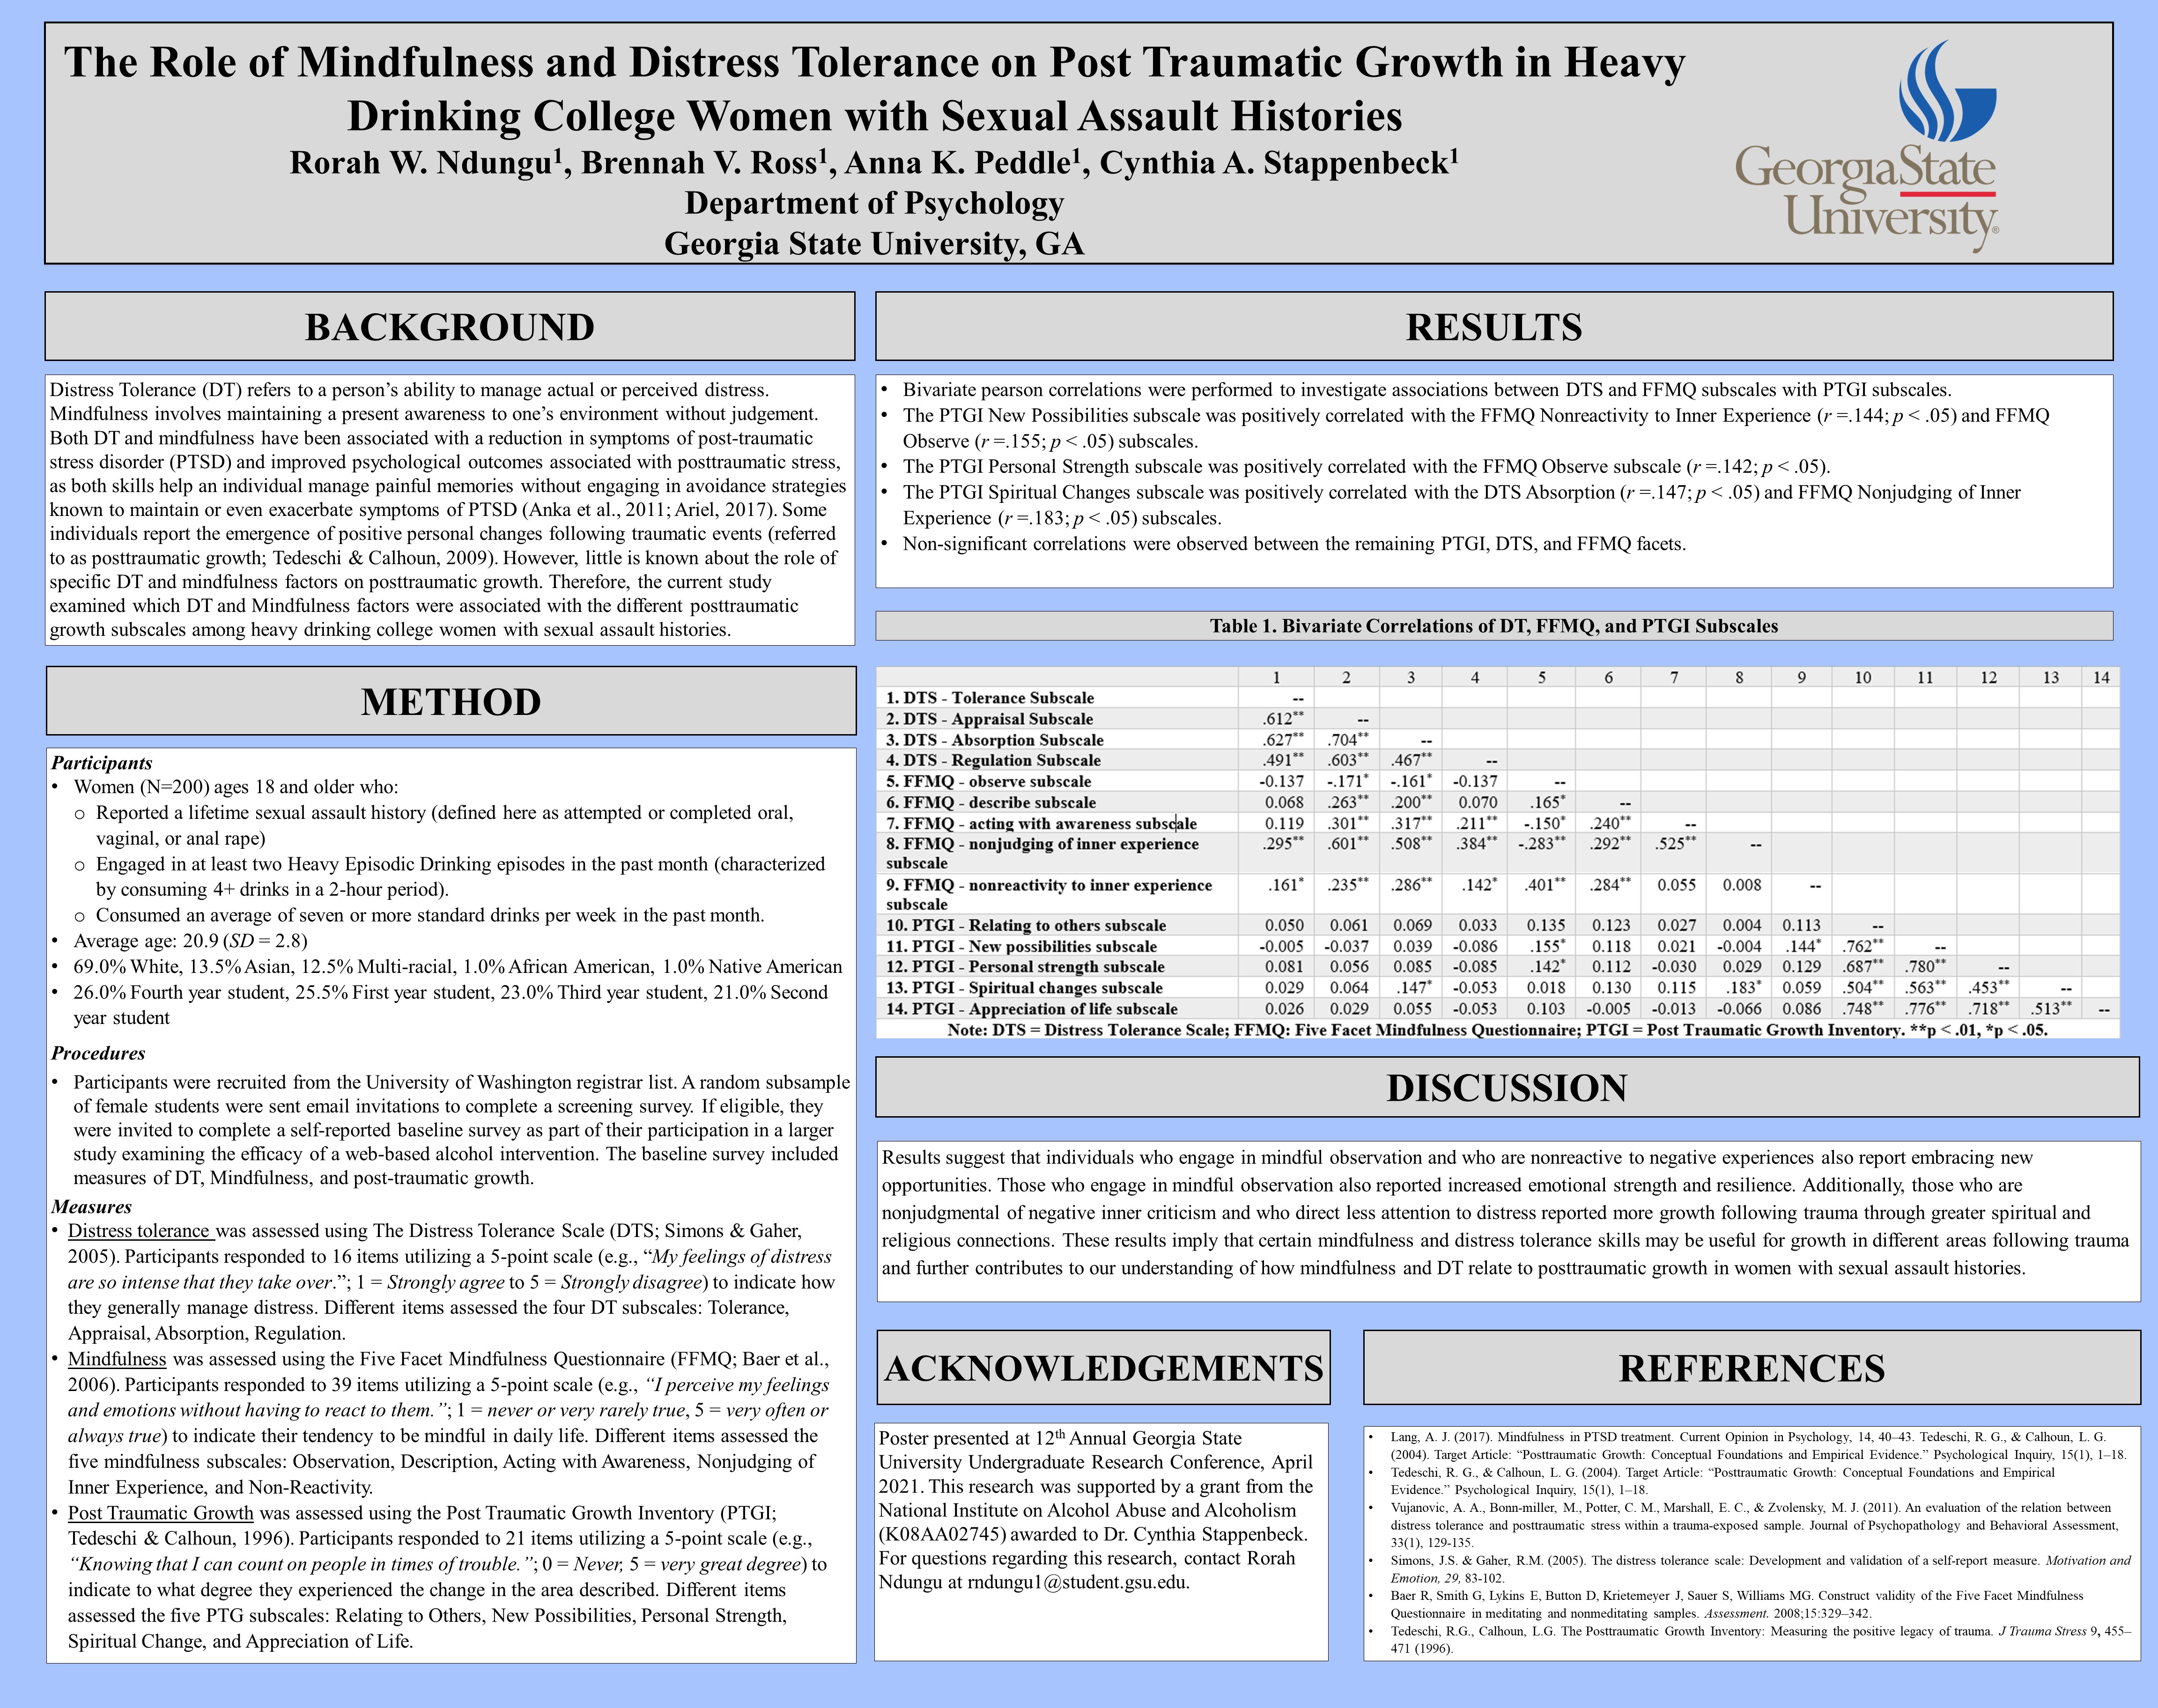 Showcase Image for The Role of Mindfulness and Distress Tolerance on Post Traumatic Growth in Heavy Drinking College Women with Sexual Assault Histories